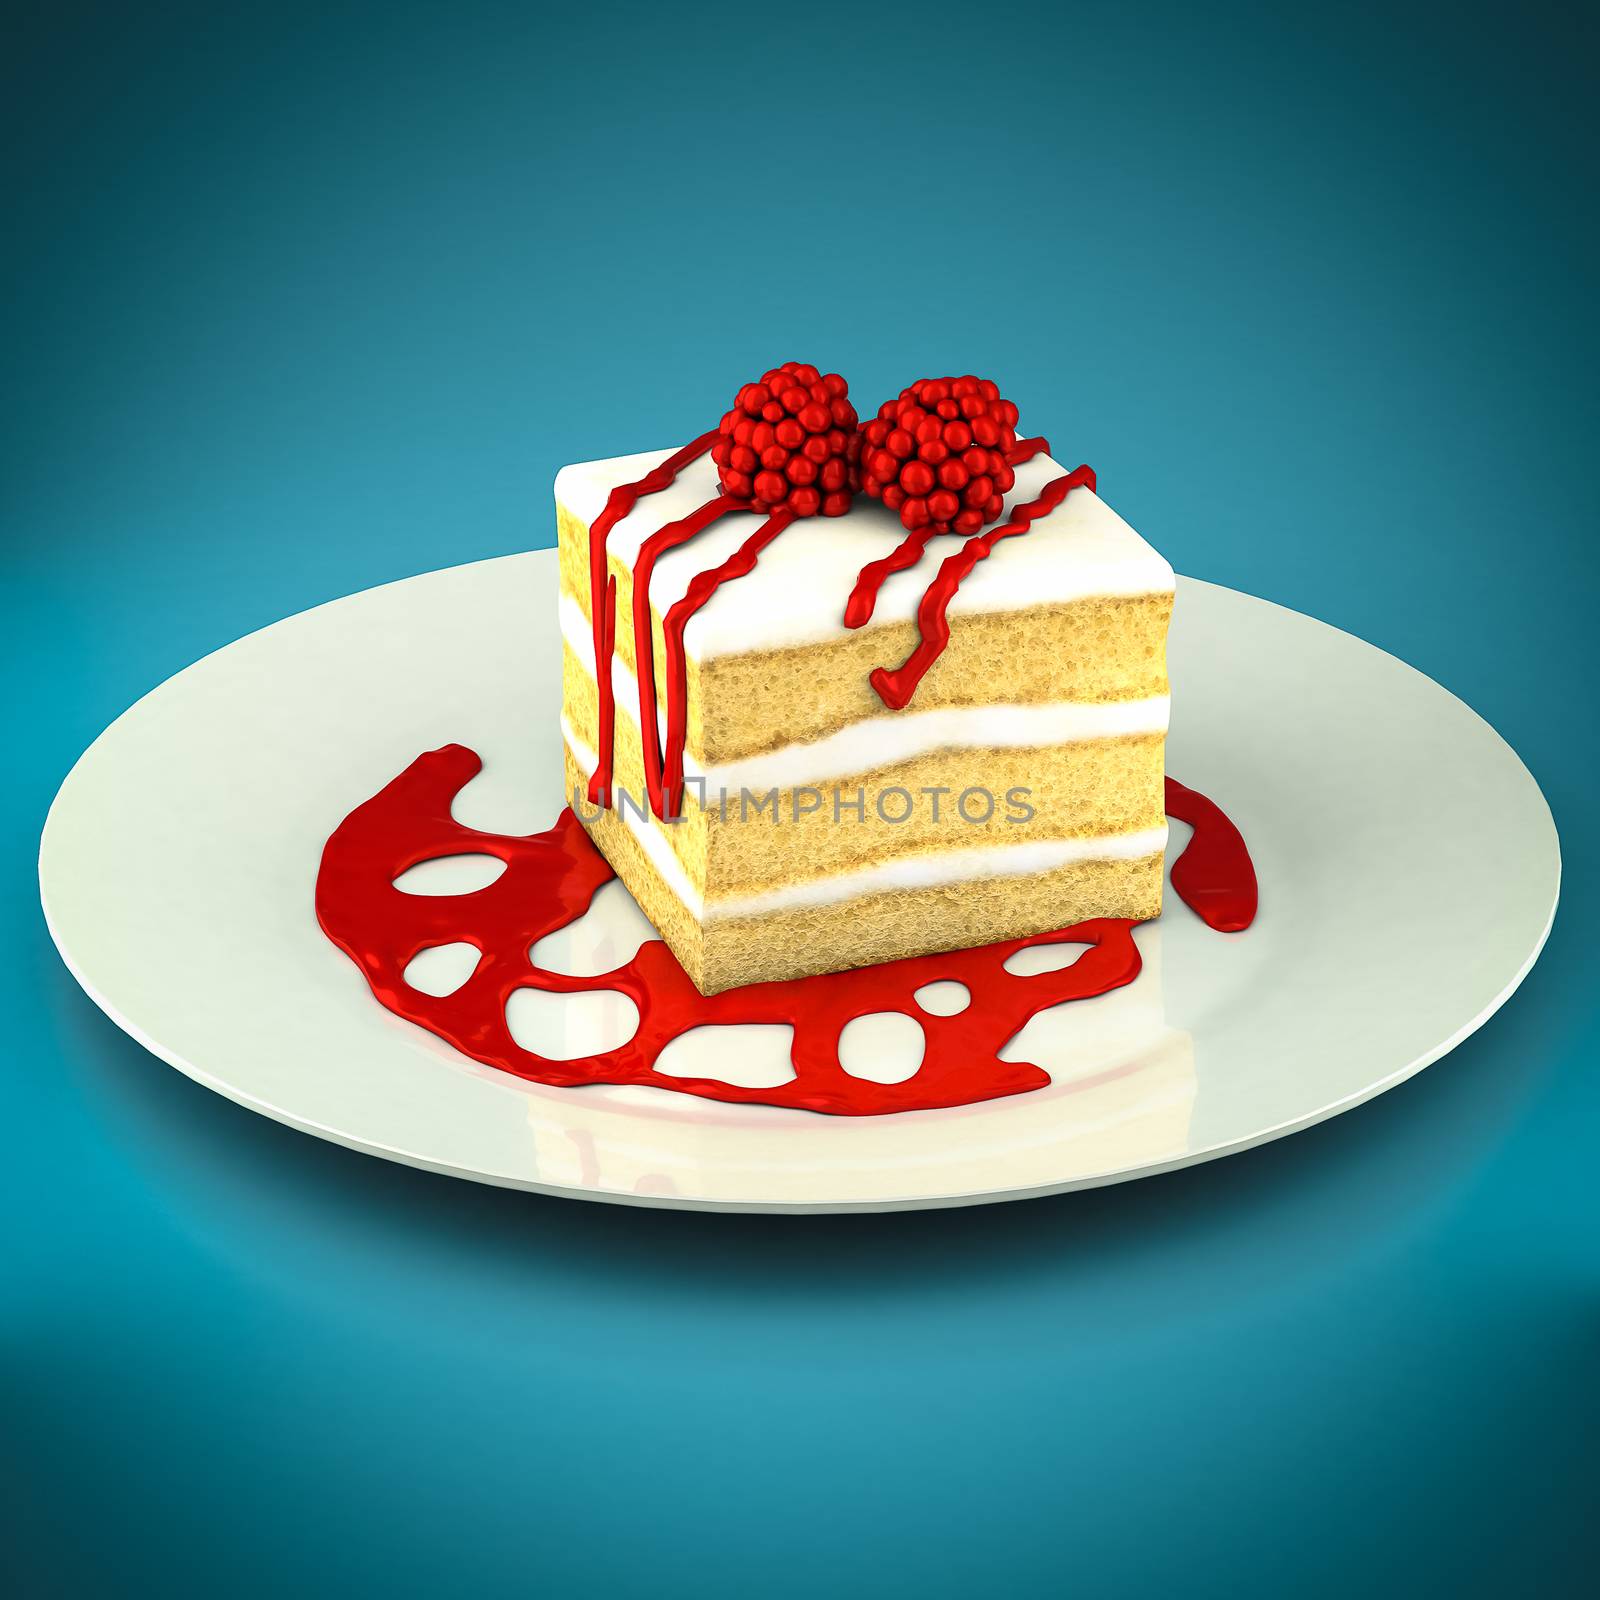 Piece of cake on a beautiful blue background